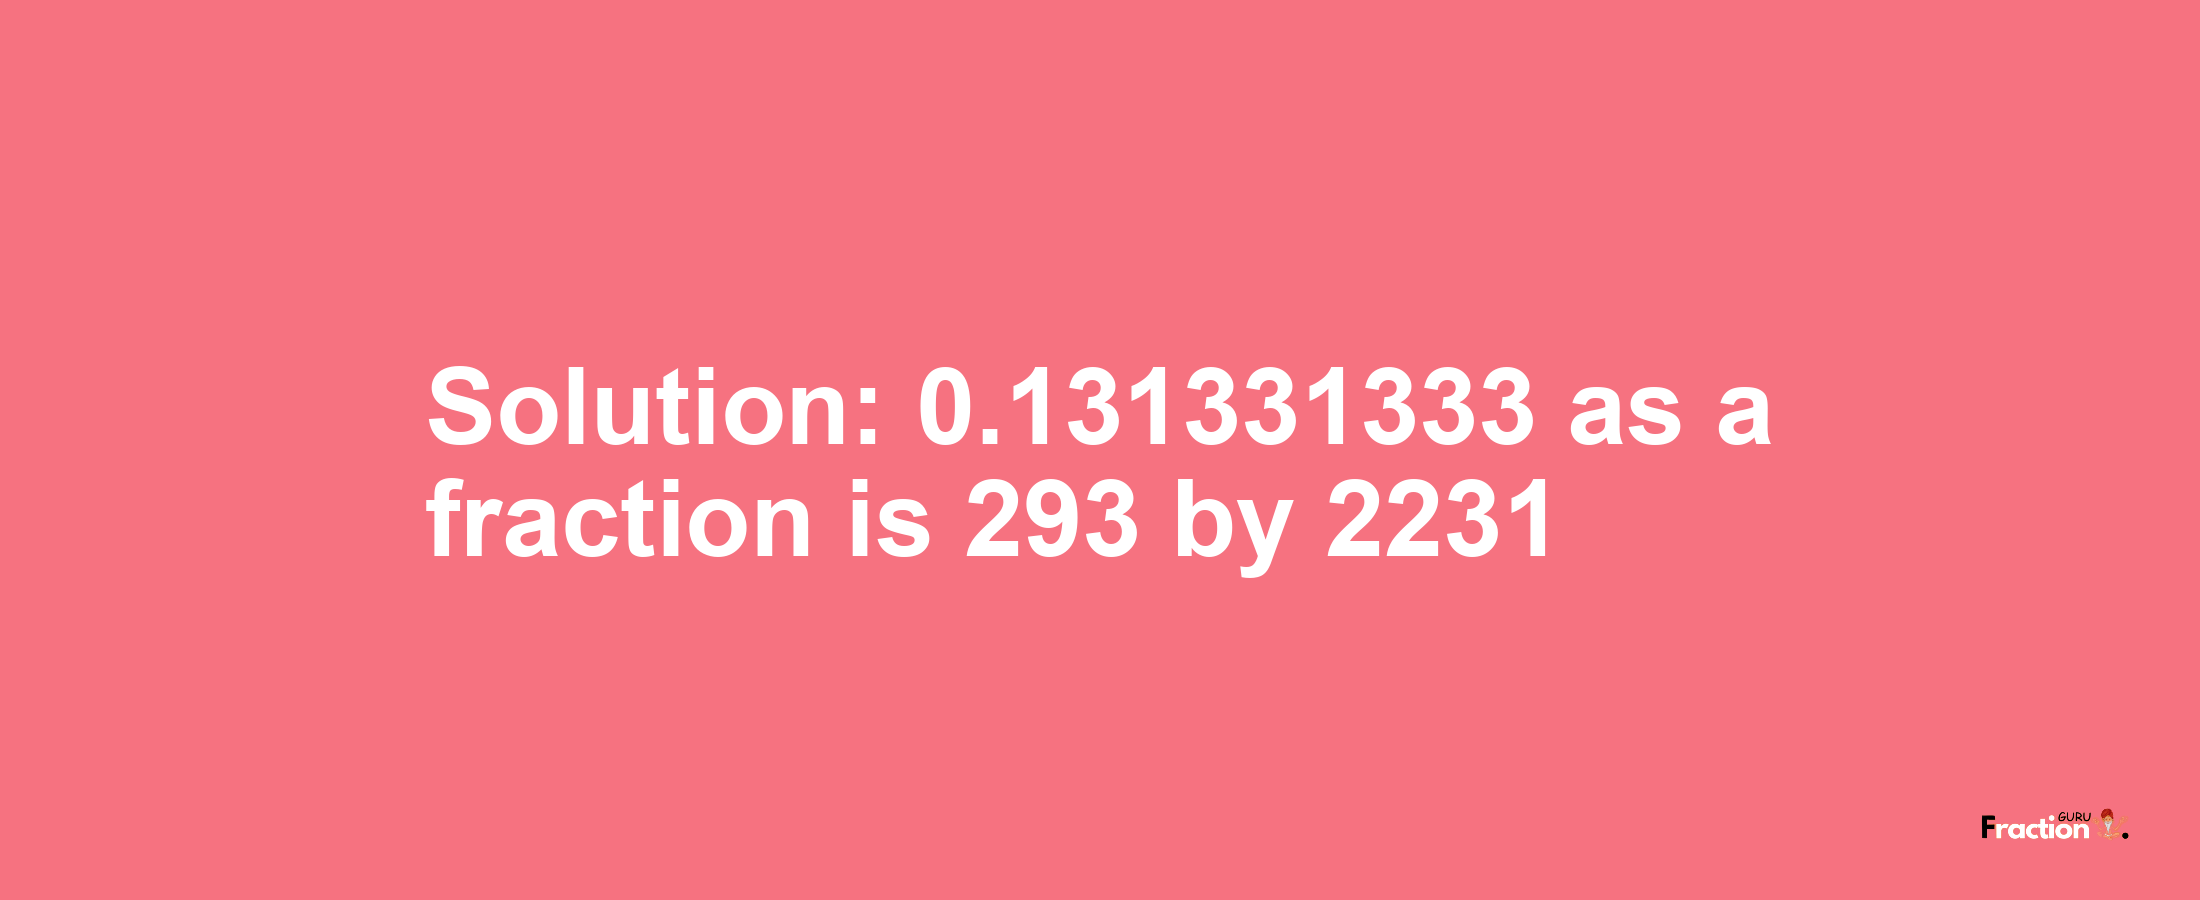 Solution:0.131331333 as a fraction is 293/2231